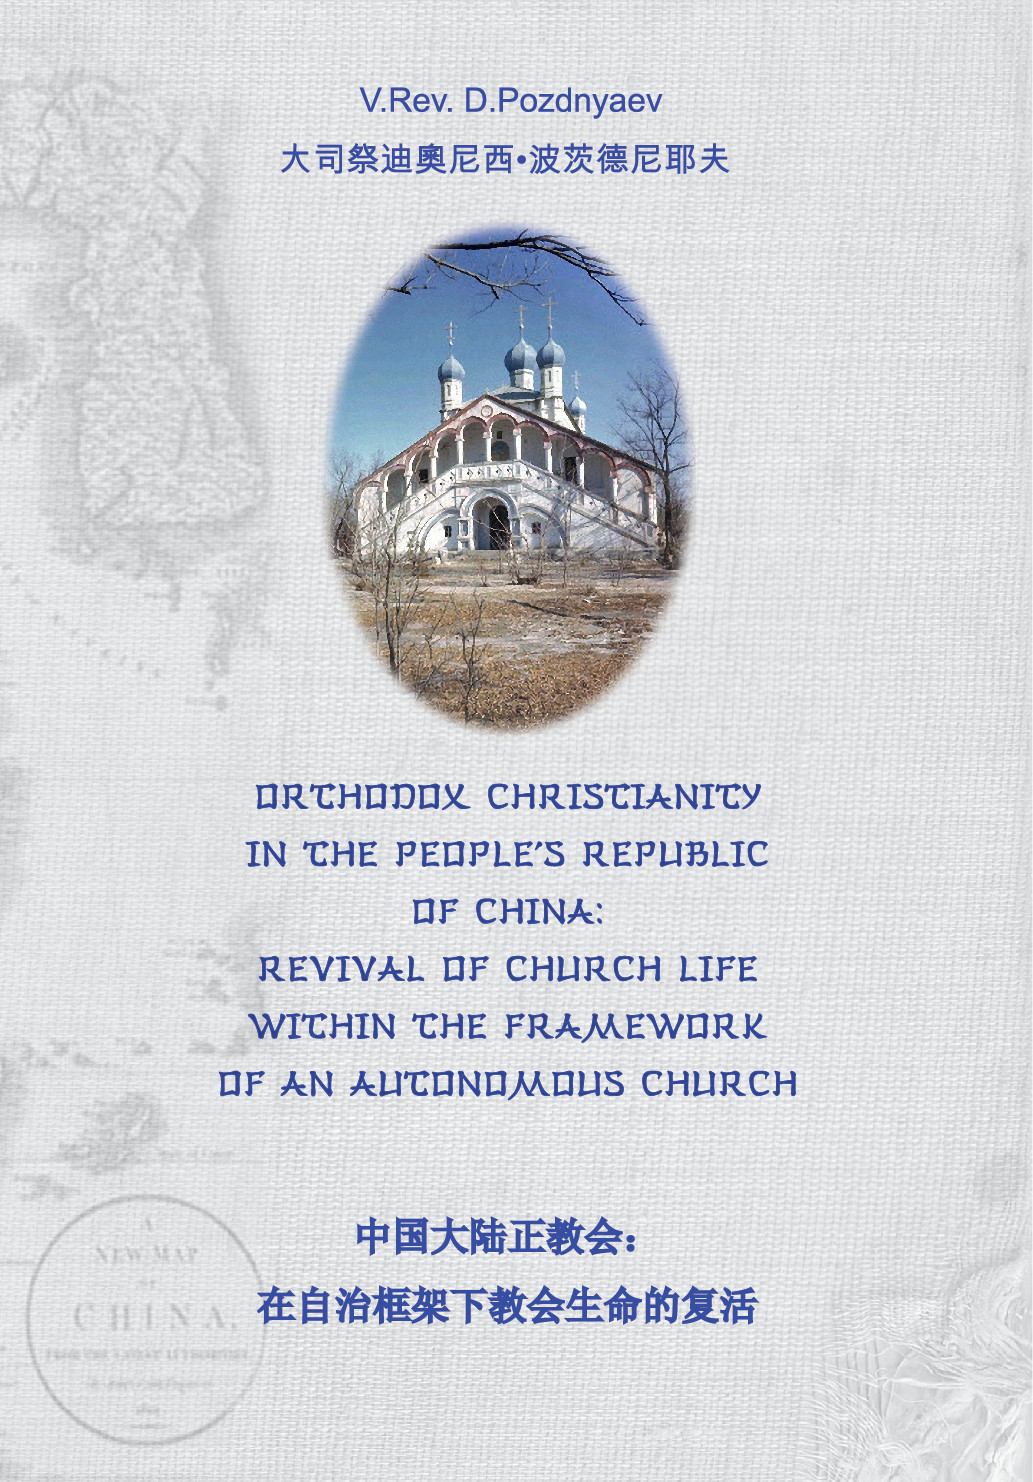 Orthodox Christianity in China: Revival of Autonomous Church (Simpl. characters)